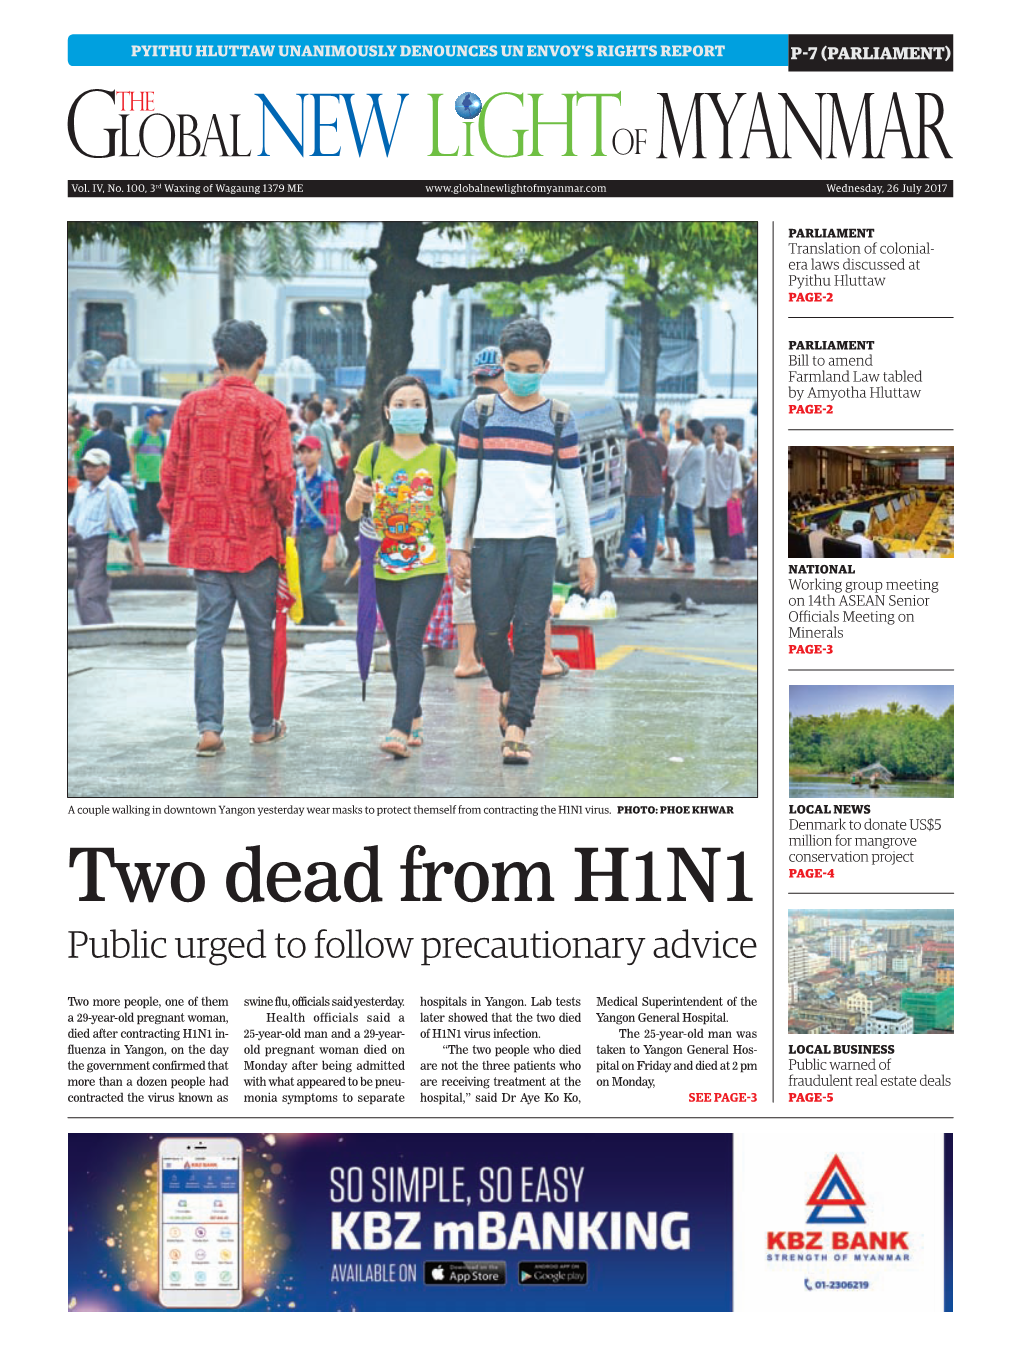 Two Dead from H1N1 P Age-4 Public Urged to Follow Precautionary Advice